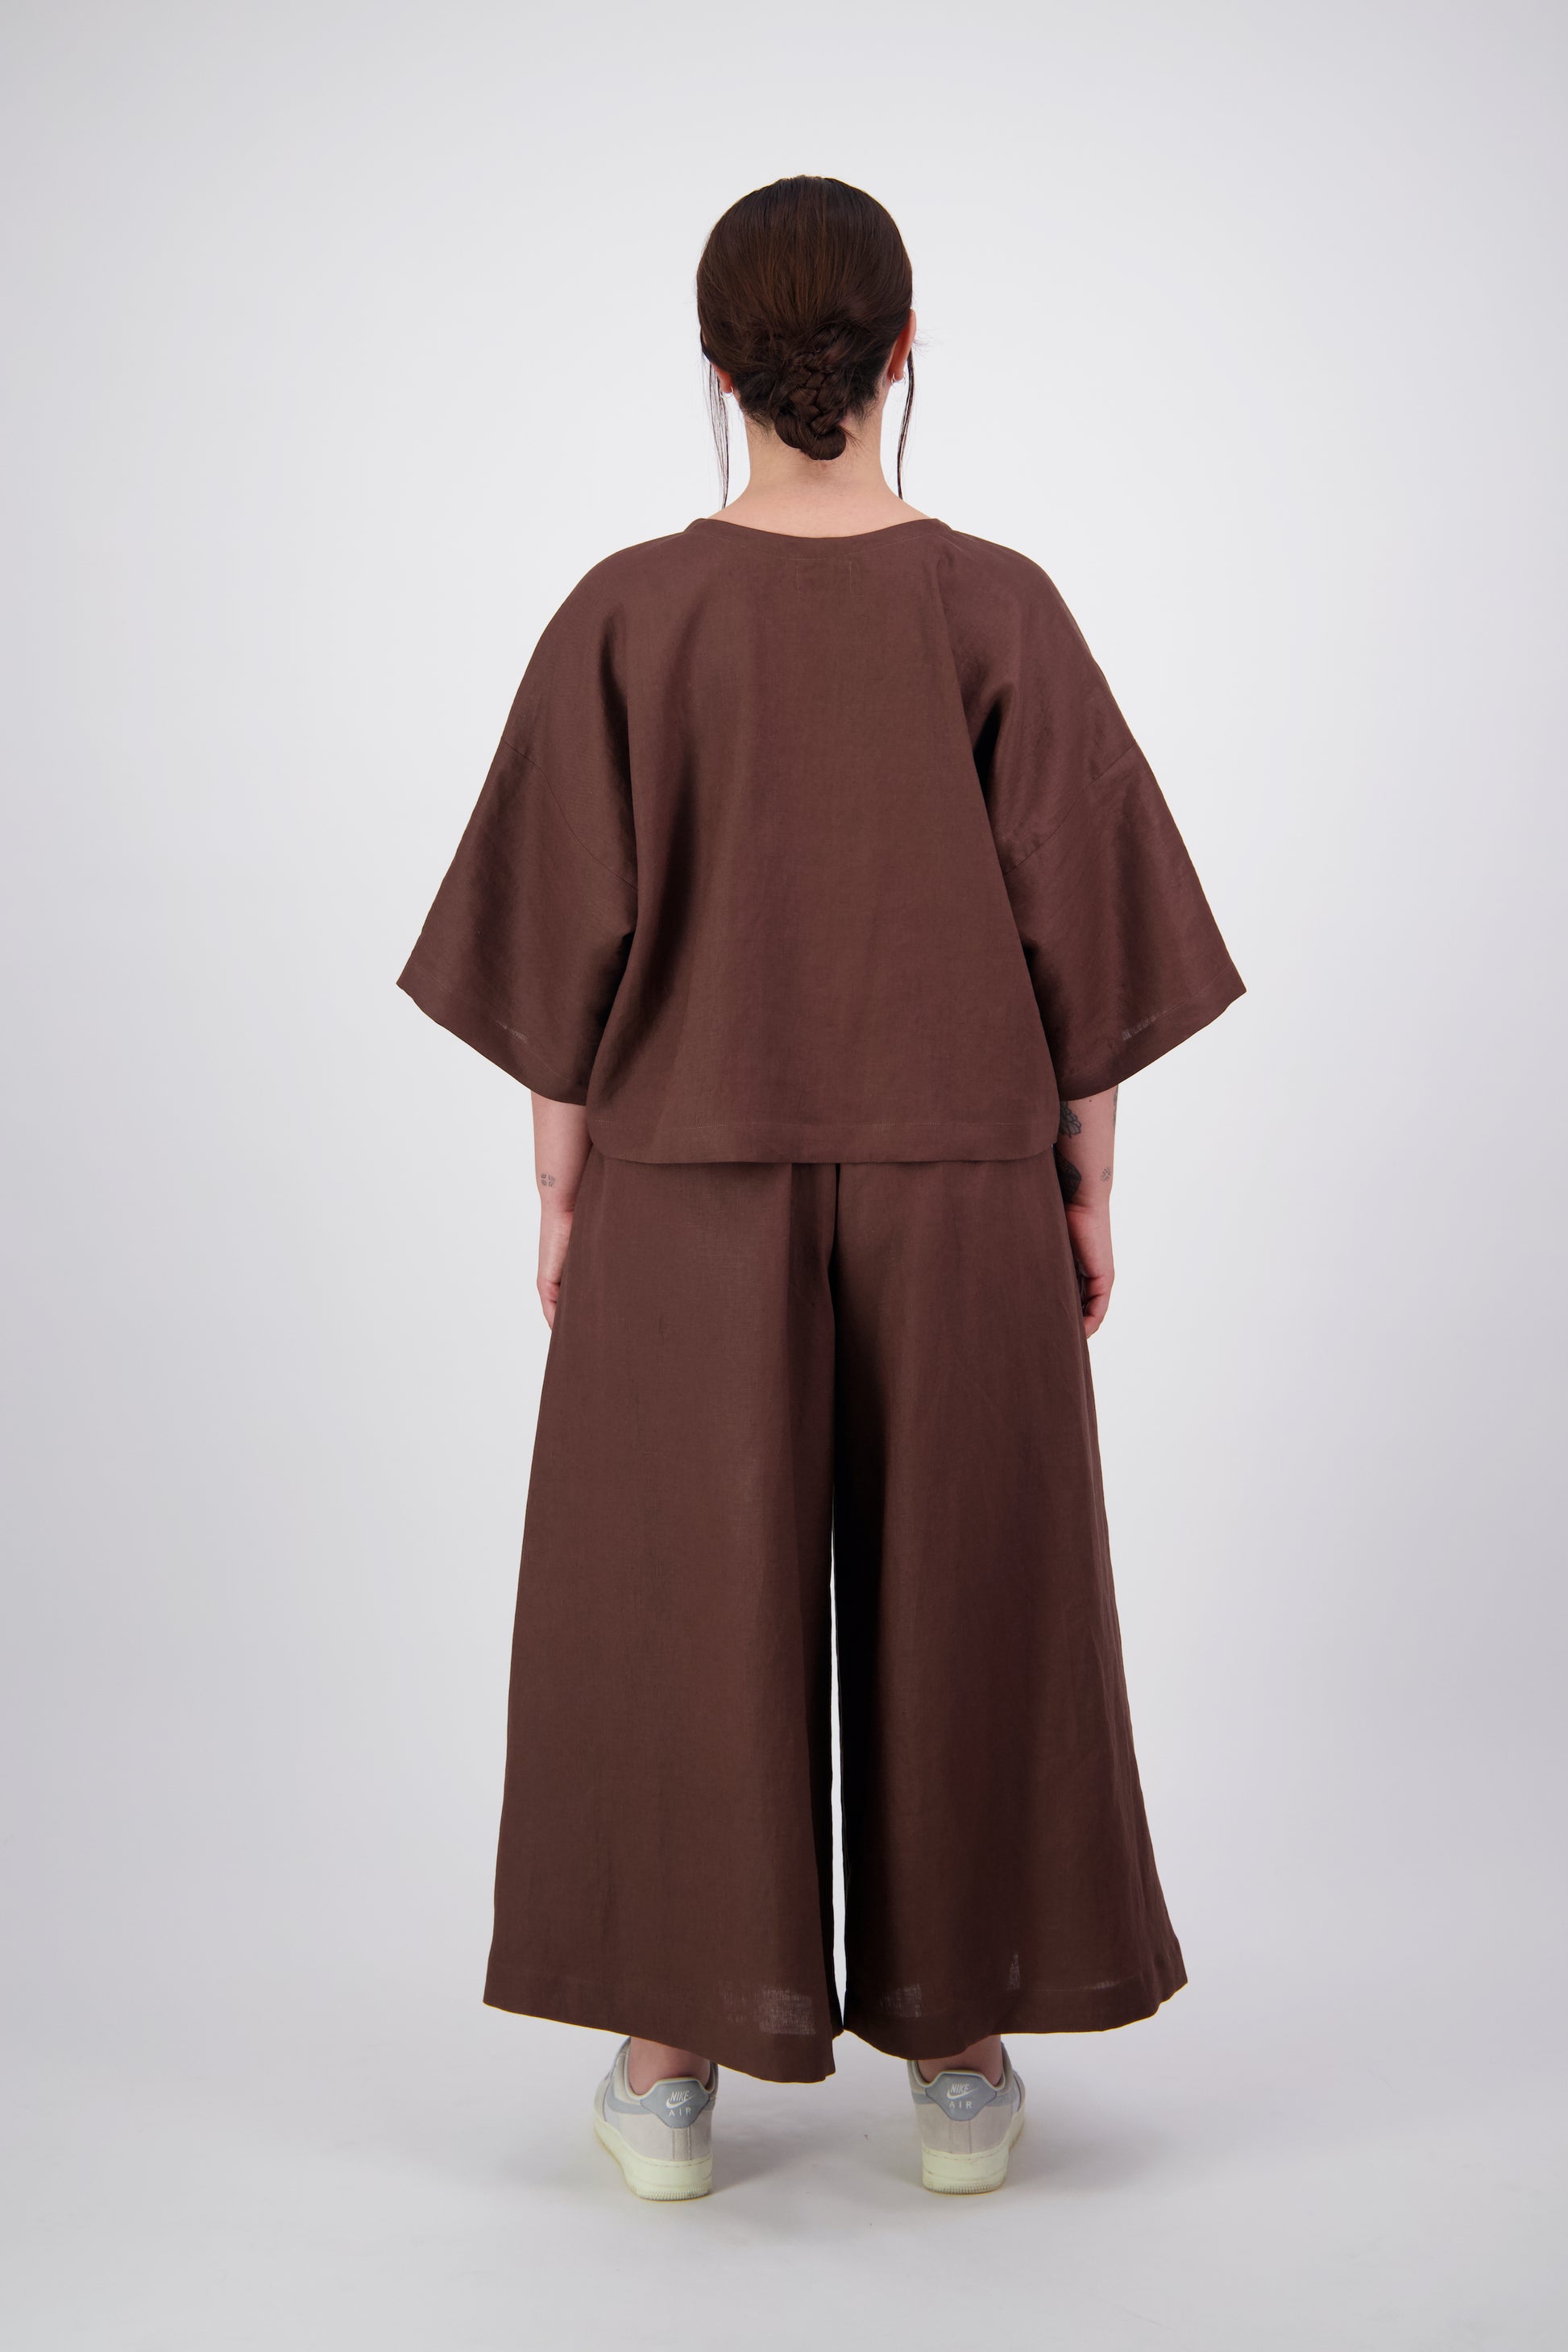 Woman wearing brown linen two piece loose fitting outfit made in new zealand